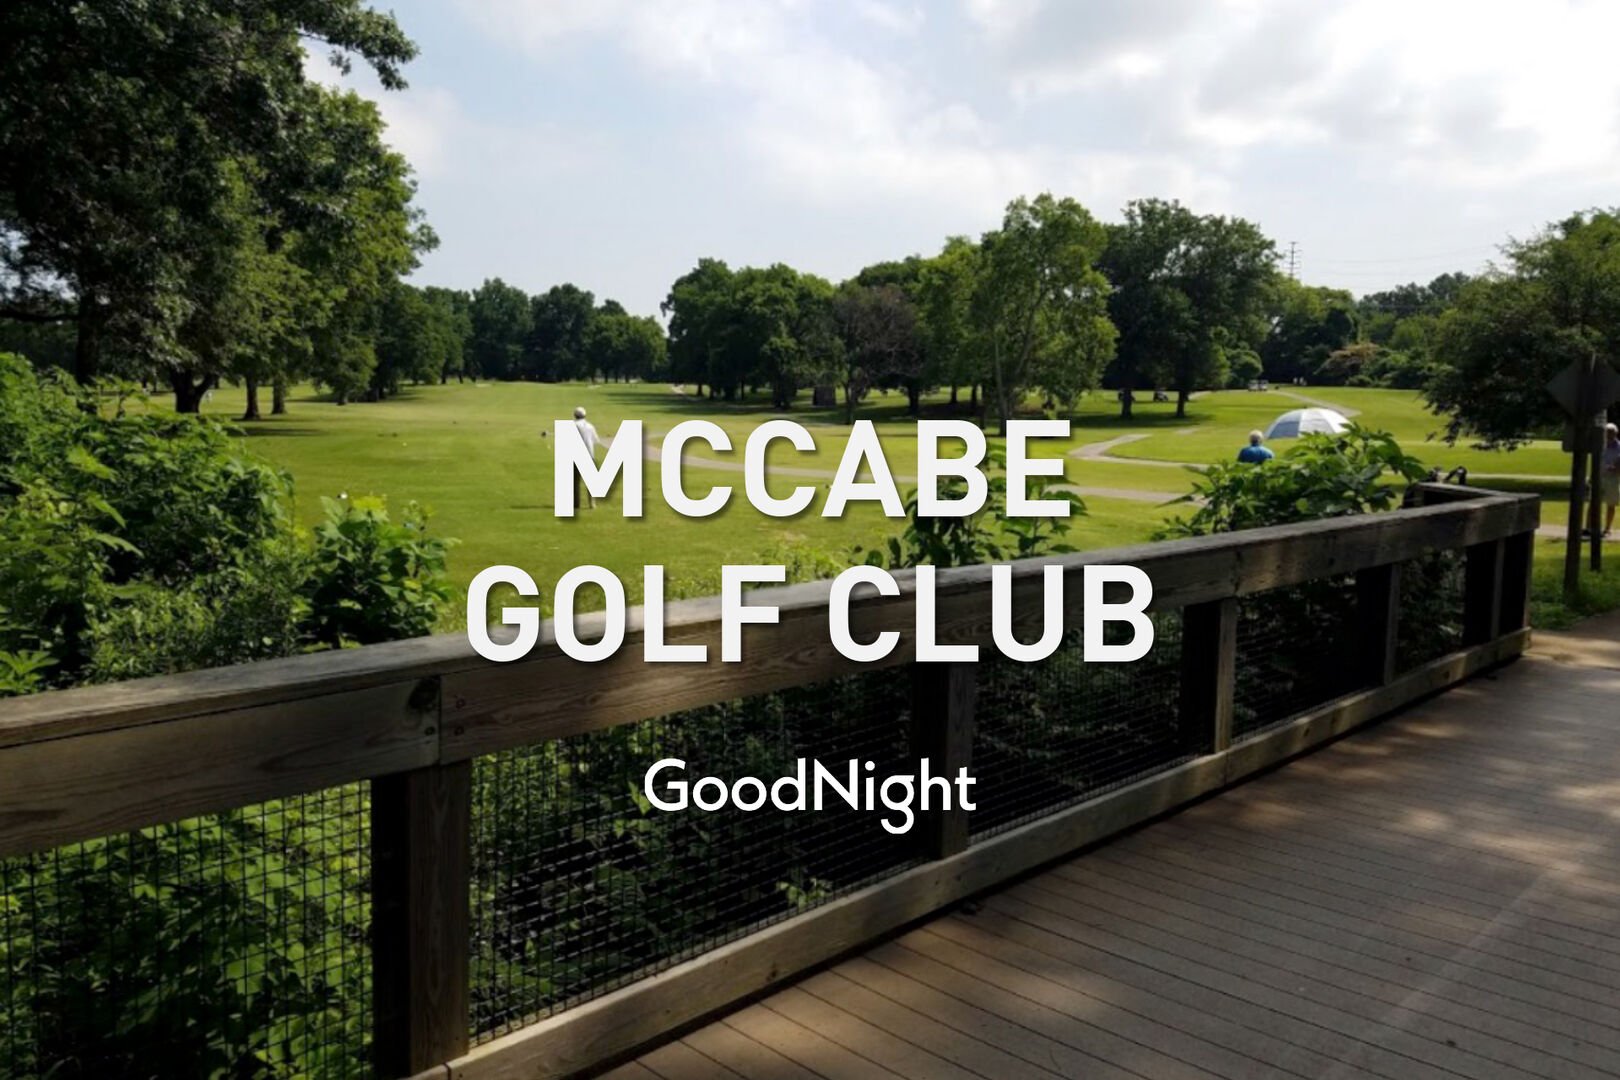 5 minutes to McCabe Golf Course.